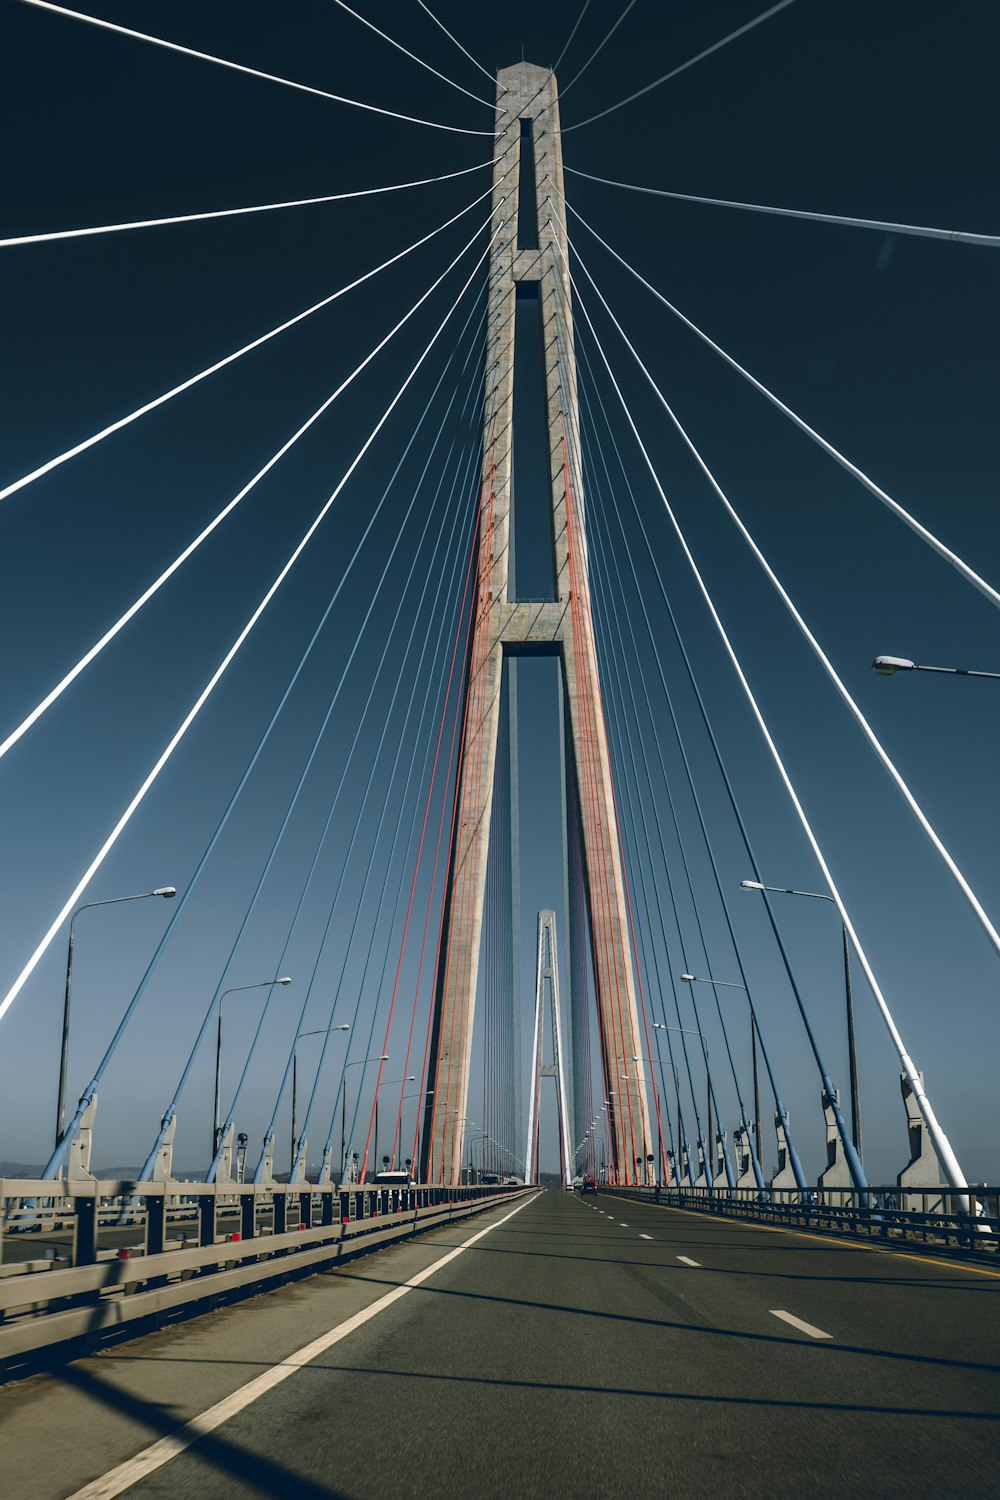 a view of a very tall bridge from a car